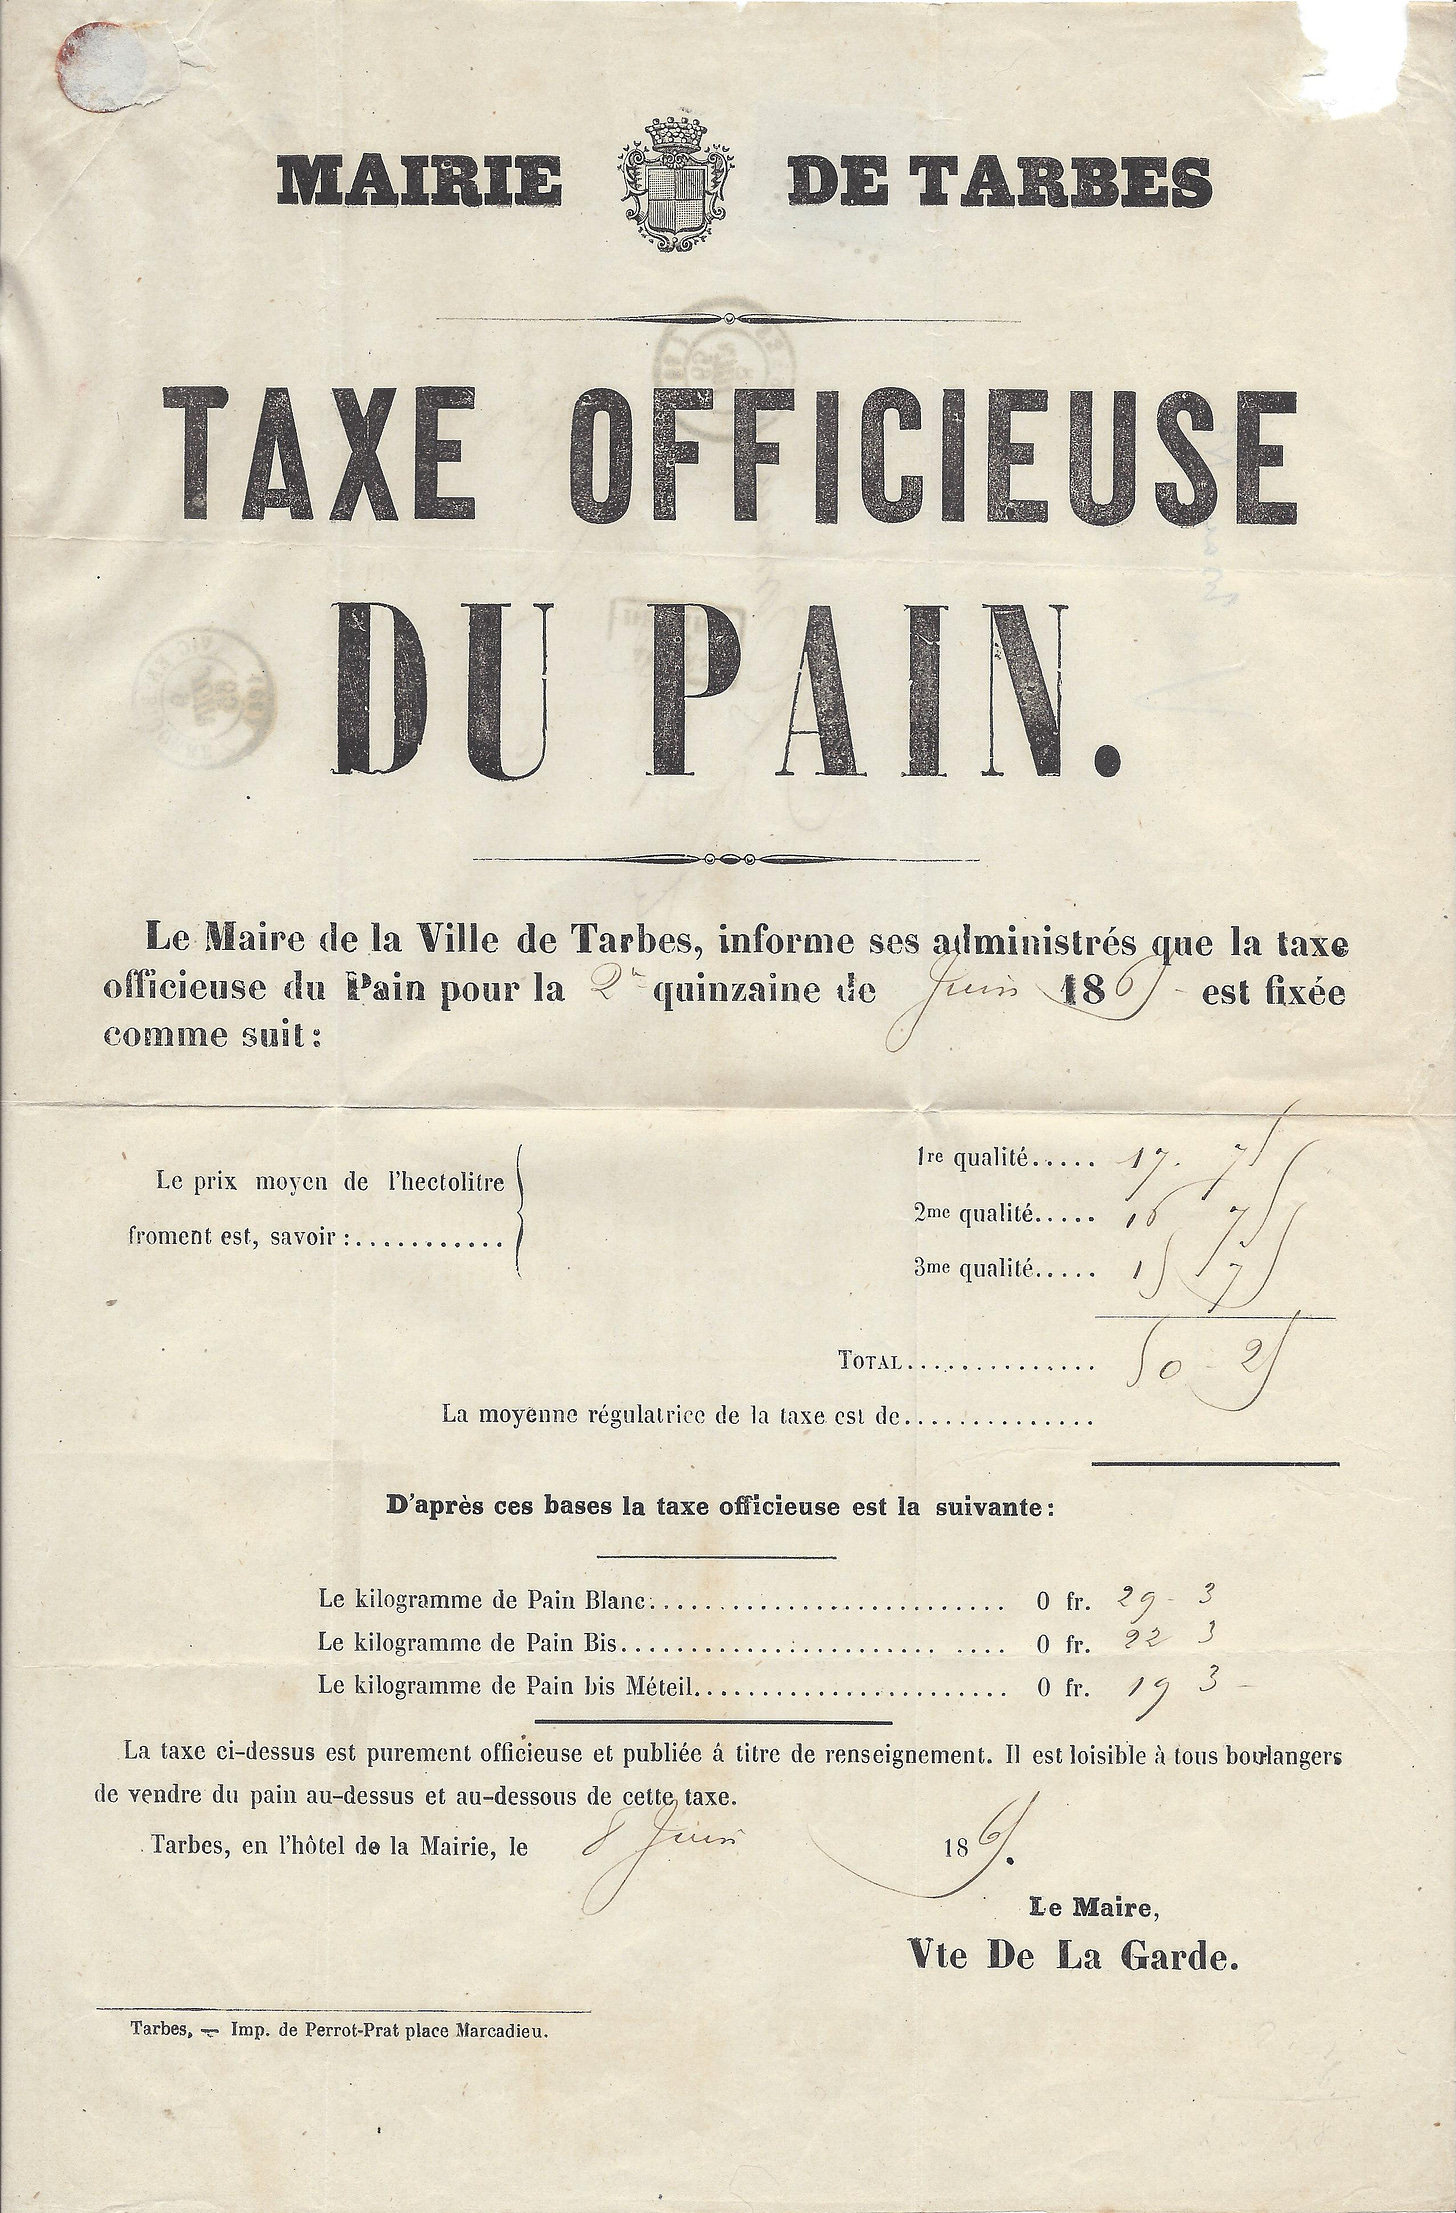 1865 poster advertising bread prices